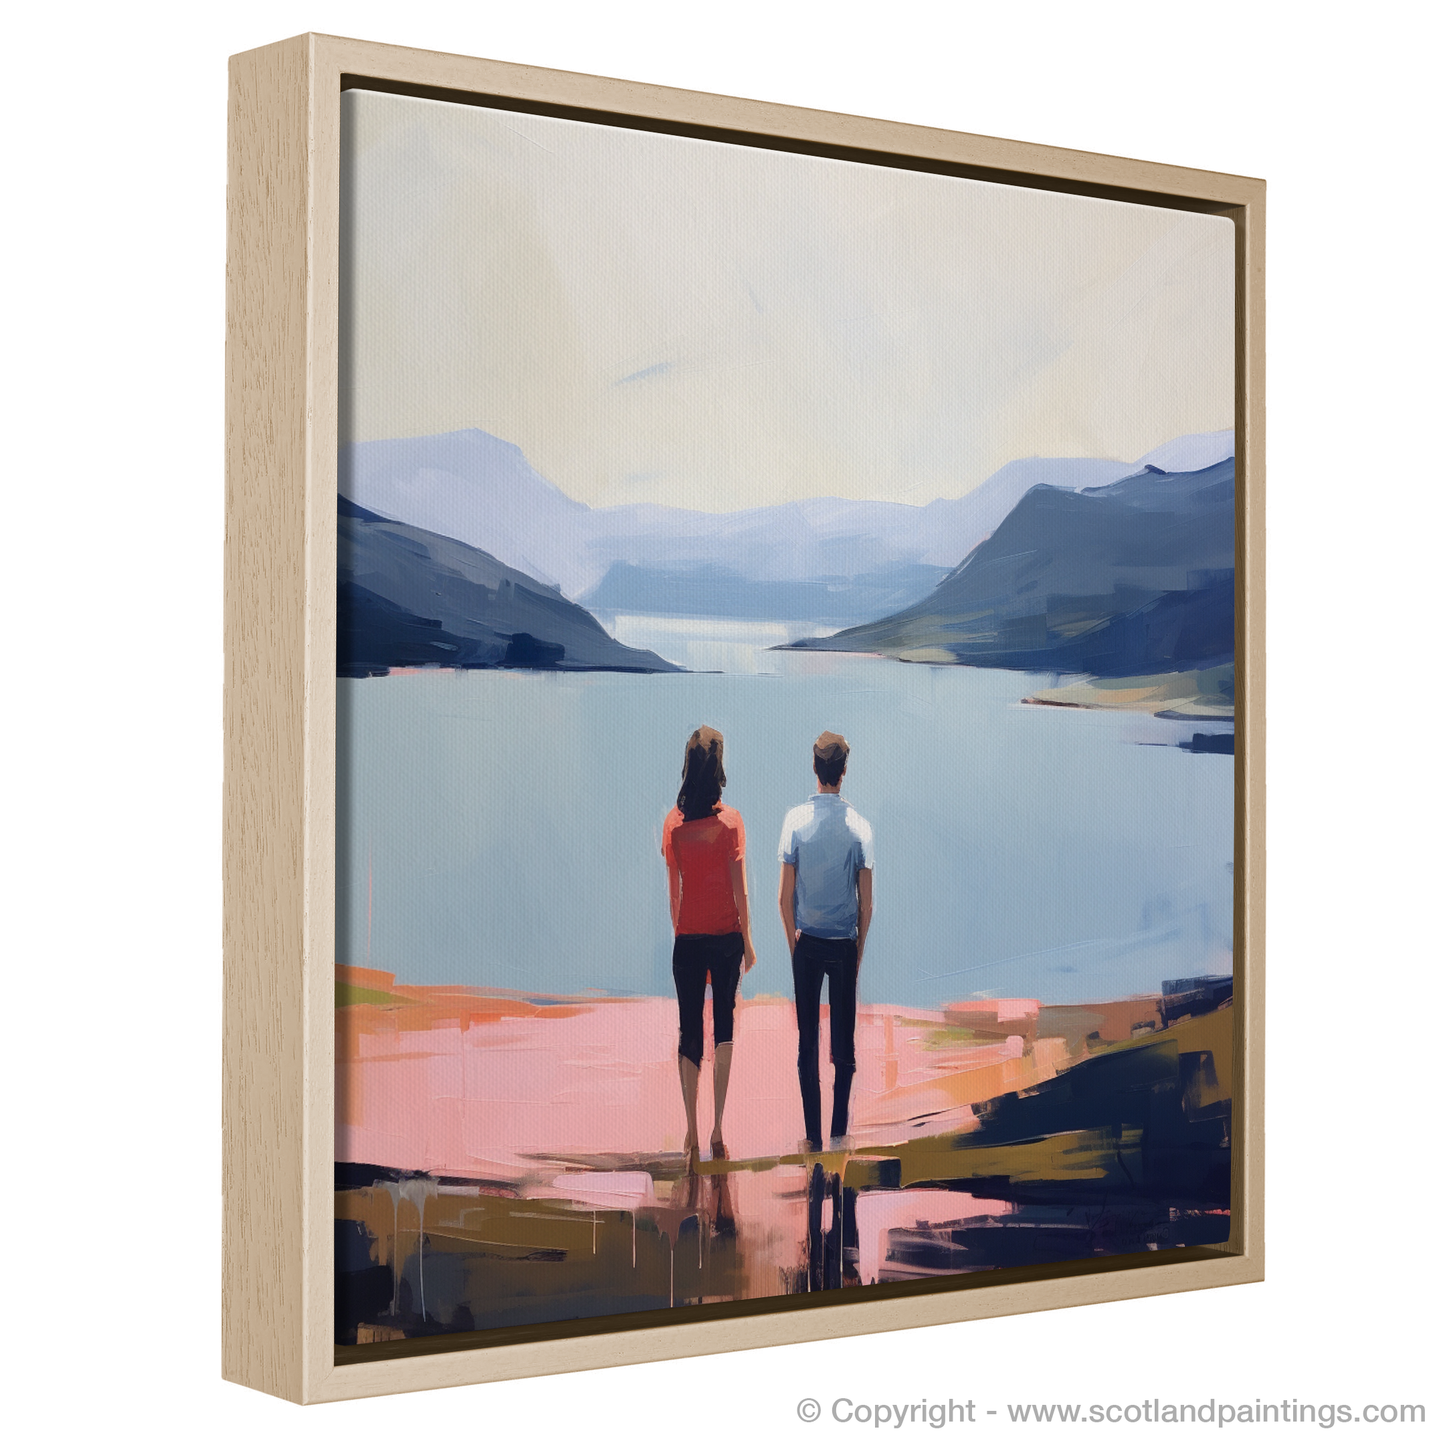 Painting and Art Print of A couple holding hands looking out on Loch Lomond entitled "Embrace at Loch Lomond: A Contemporary Vision of Serenity and Togetherness".